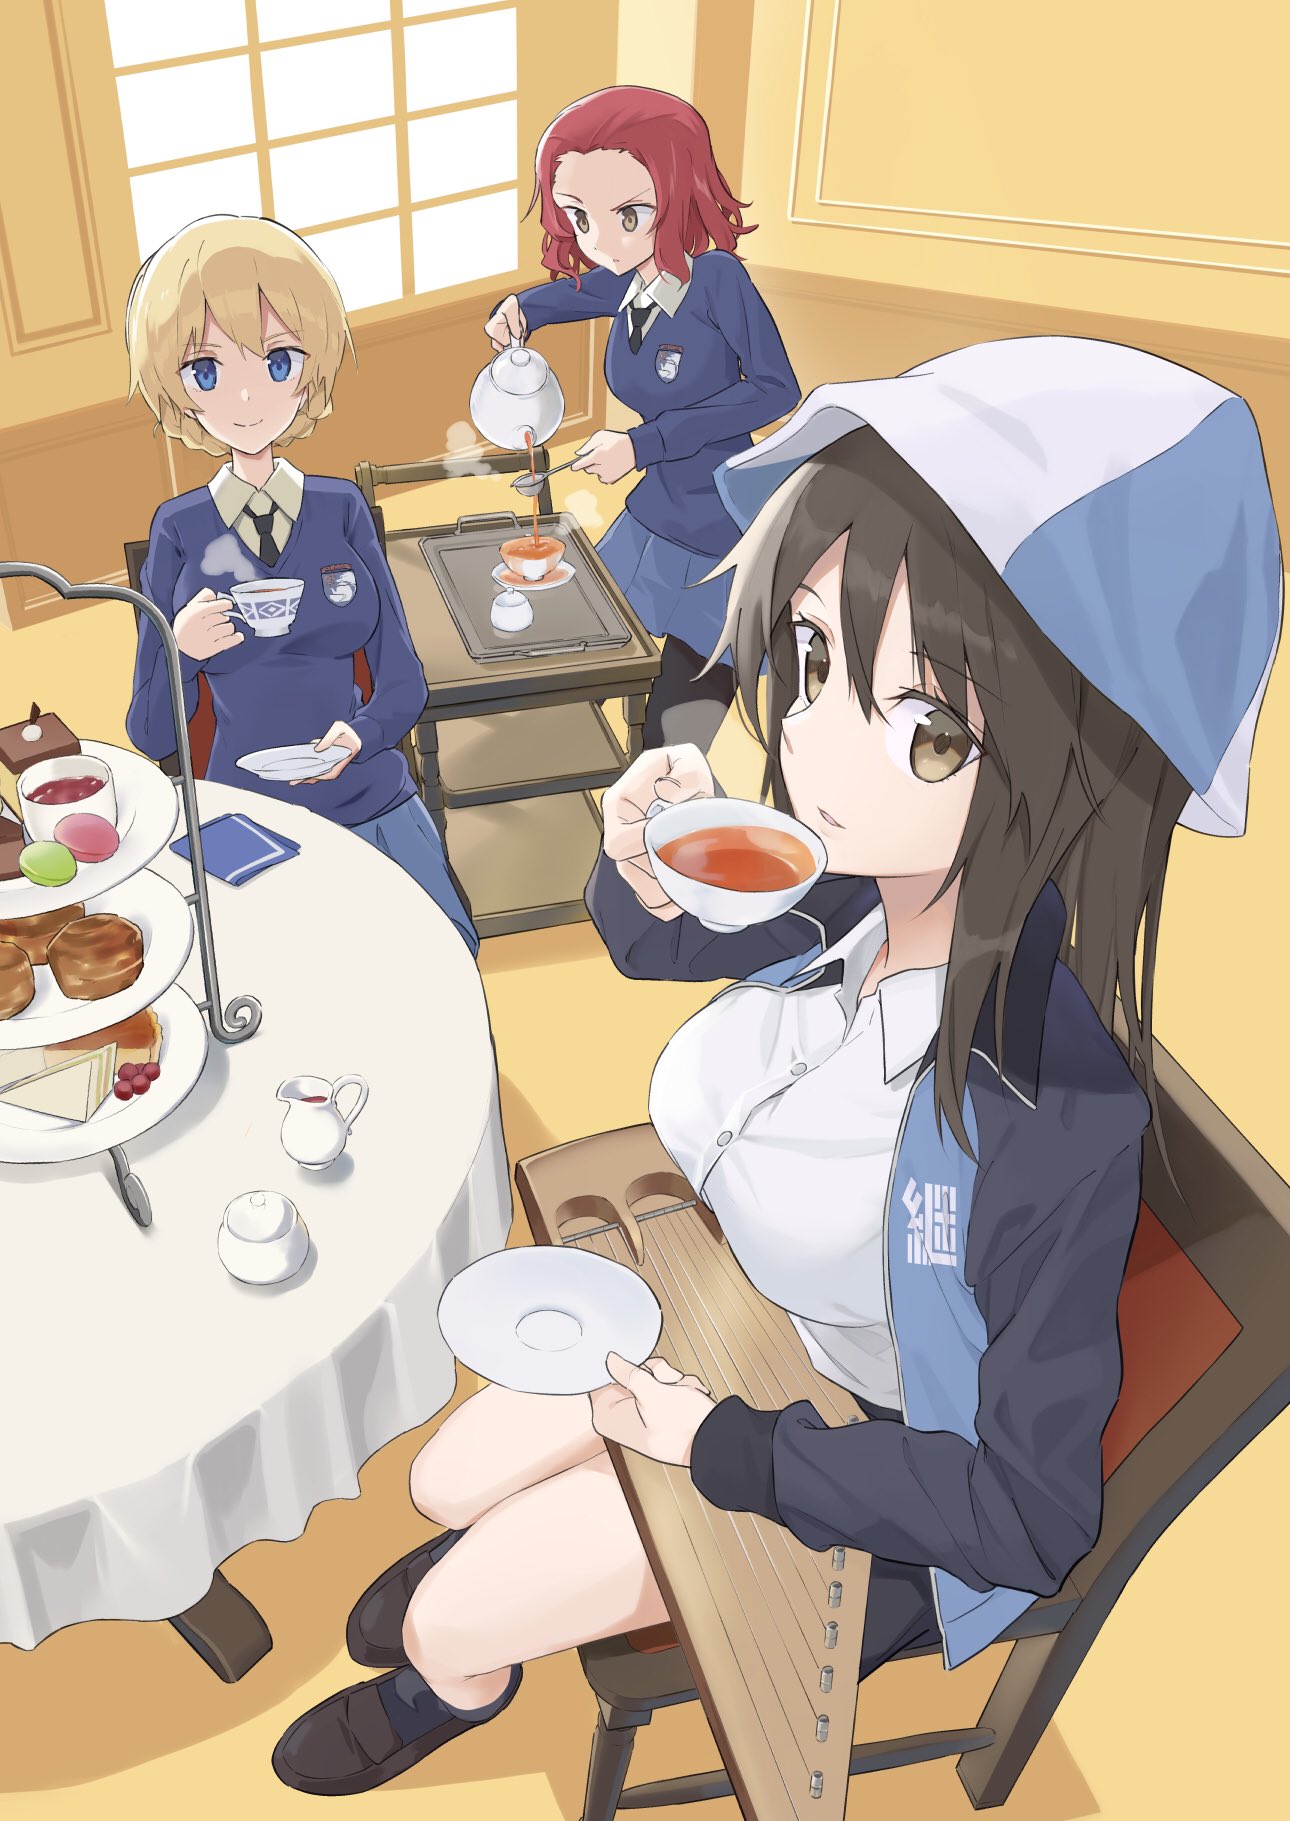 3girls ankle_boots bangs black_neckwear blonde_hair blue_eyes blue_headwear blue_jacket blue_skirt blue_sweater boots braid brown_eyes brown_hair cart closed_mouth commentary cup darjeeling_(girls_und_panzer) decantering dessert dress_shirt emblem food girls_und_panzer hat highres holding holding_cup holding_instrument holding_saucer holding_teapot indoors instrument jacket kantele keizoku_military_uniform long_hair long_sleeves looking_at_viewer macaron mika_(girls_und_panzer) military military_uniform miniskirt multiple_girls muteki_soda necktie on_chair open_clothes open_jacket pantyhose parted_lips pleated_skirt pouring raglan_sleeves rosehip_(girls_und_panzer) saucer school_uniform shirt short_hair sitting skirt smile spilling st._gloriana's_school_uniform standing stream sweater table tablecloth tea teacup tied_hair tiered_tray track_jacket tray twin_braids uniform v-neck white_shirt wing_collar wooden_chair